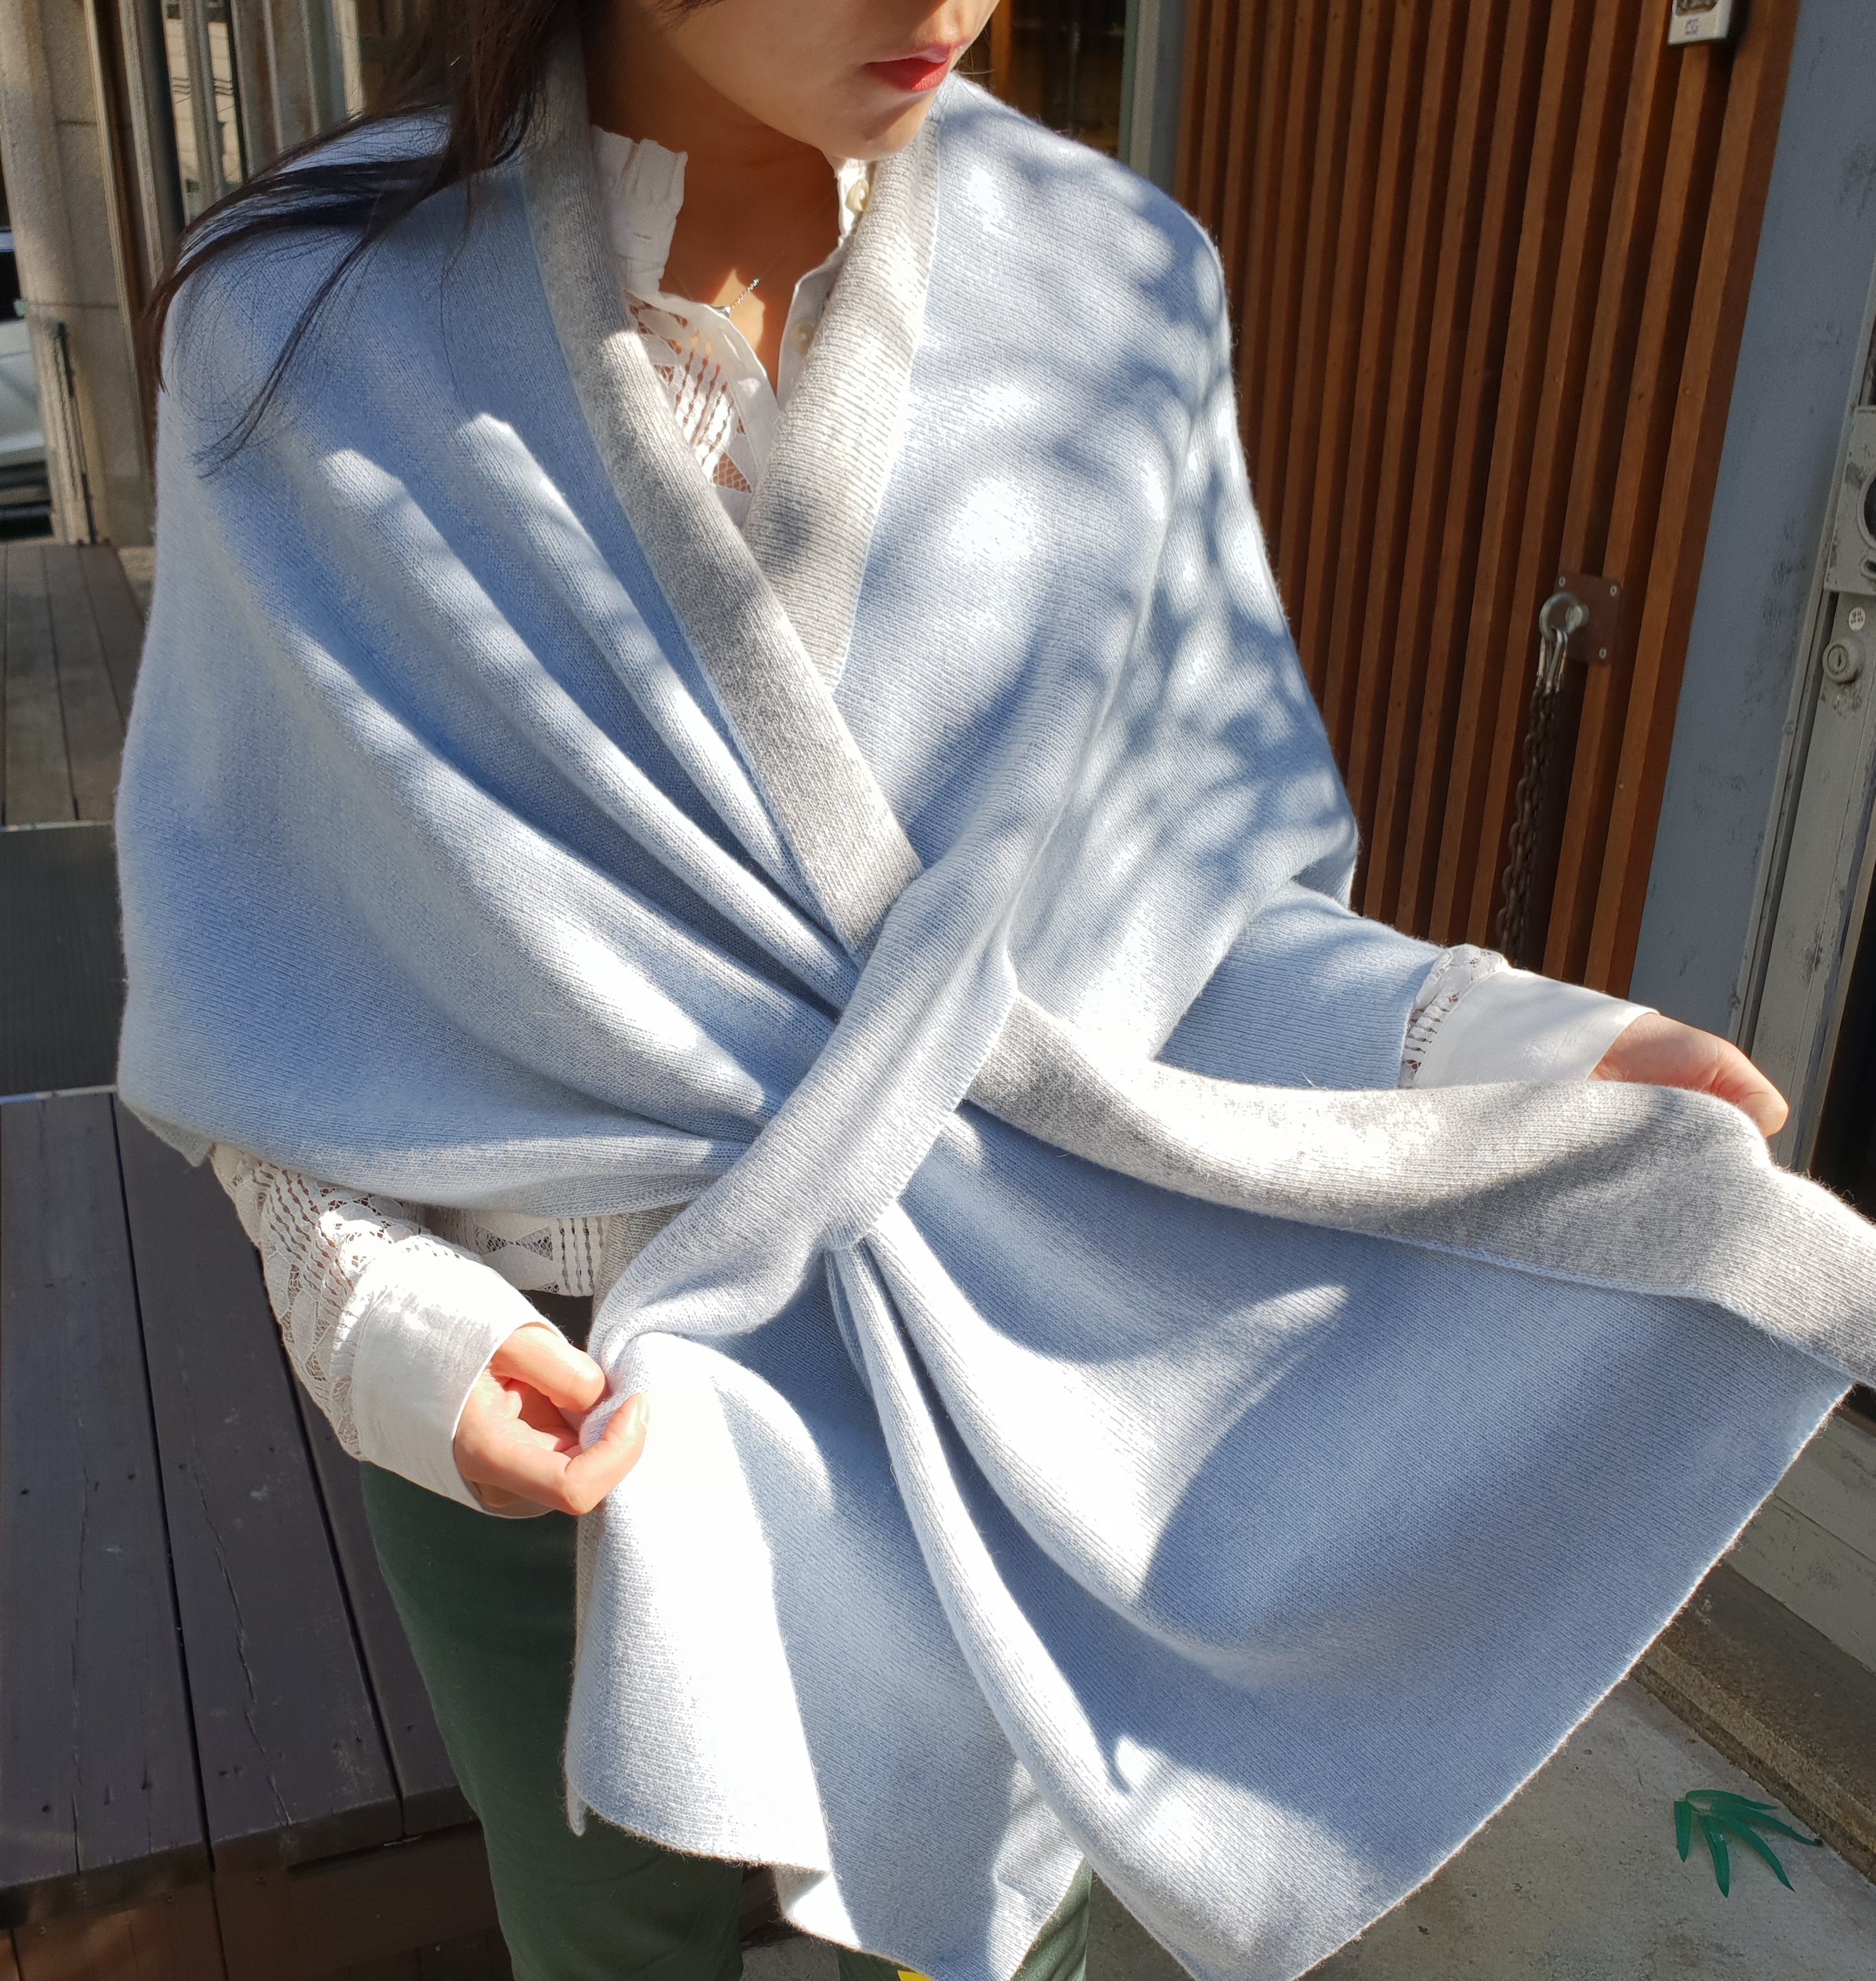 carro positano, iminglobal, holiday gift, italy cashmere, cashmere